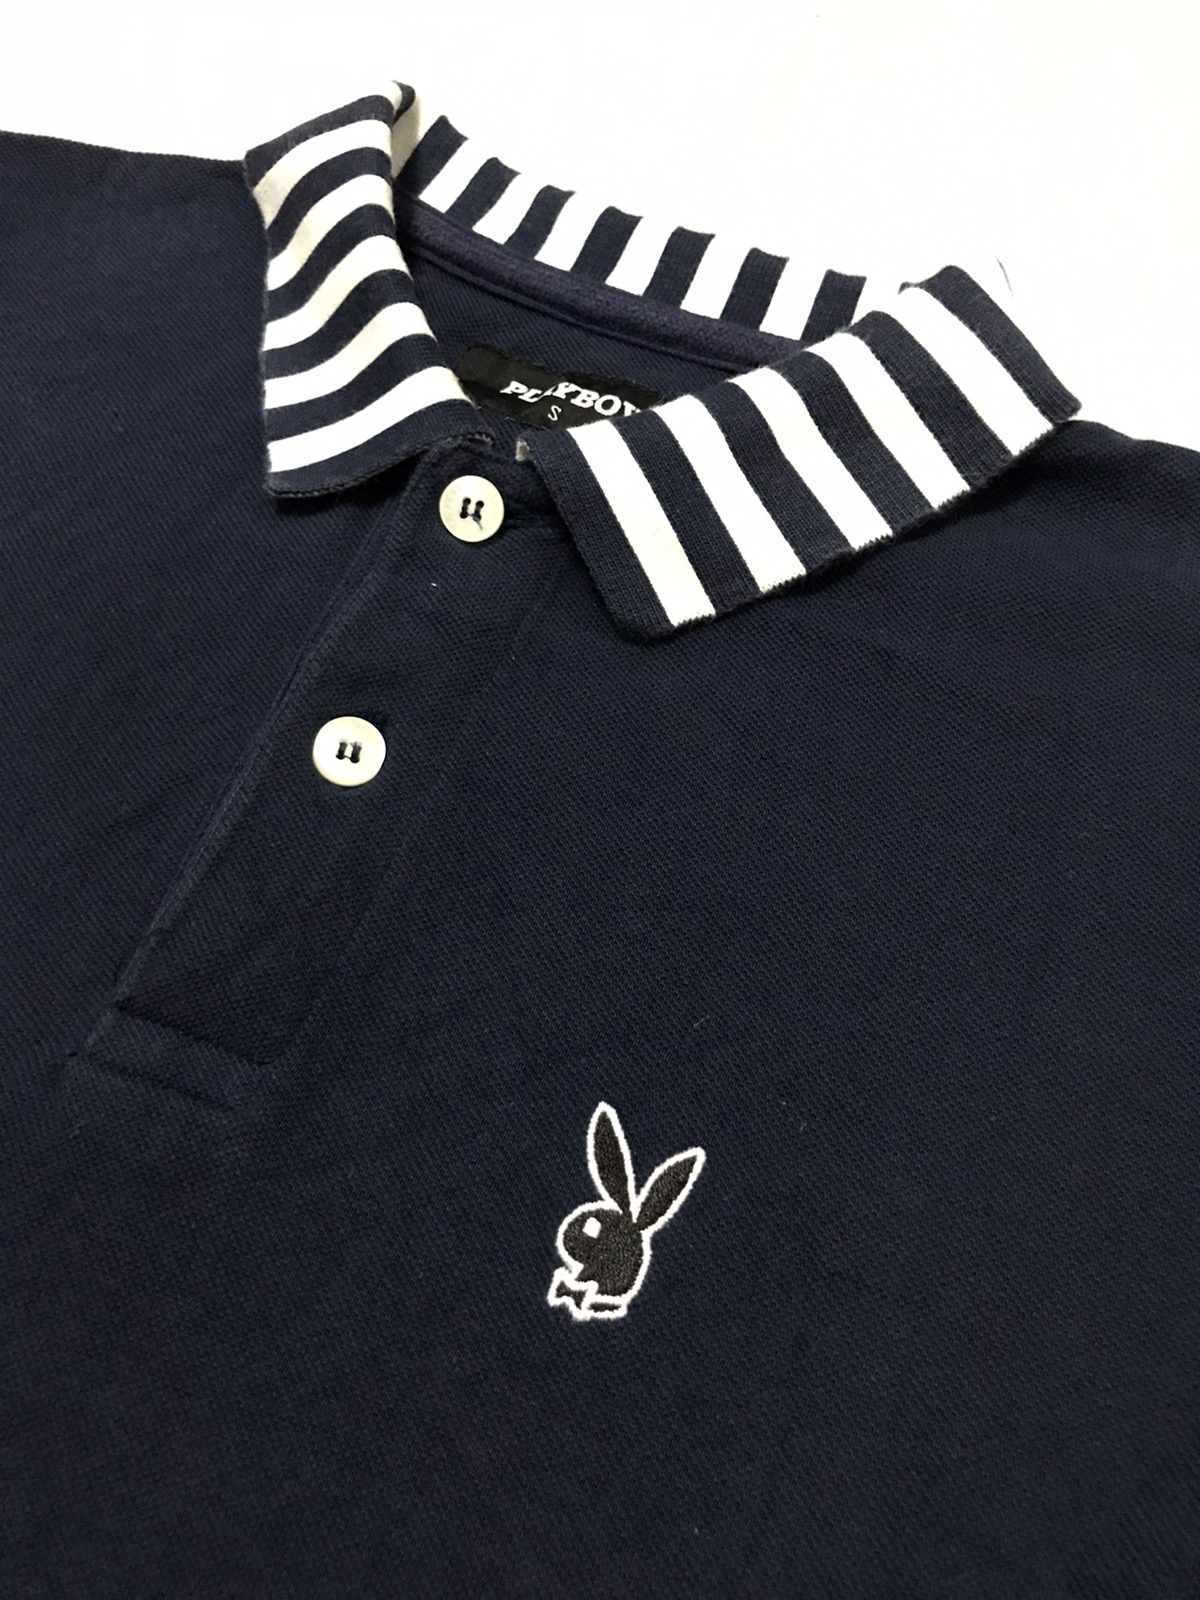 Playboy - Playboy polos for women’s - 2